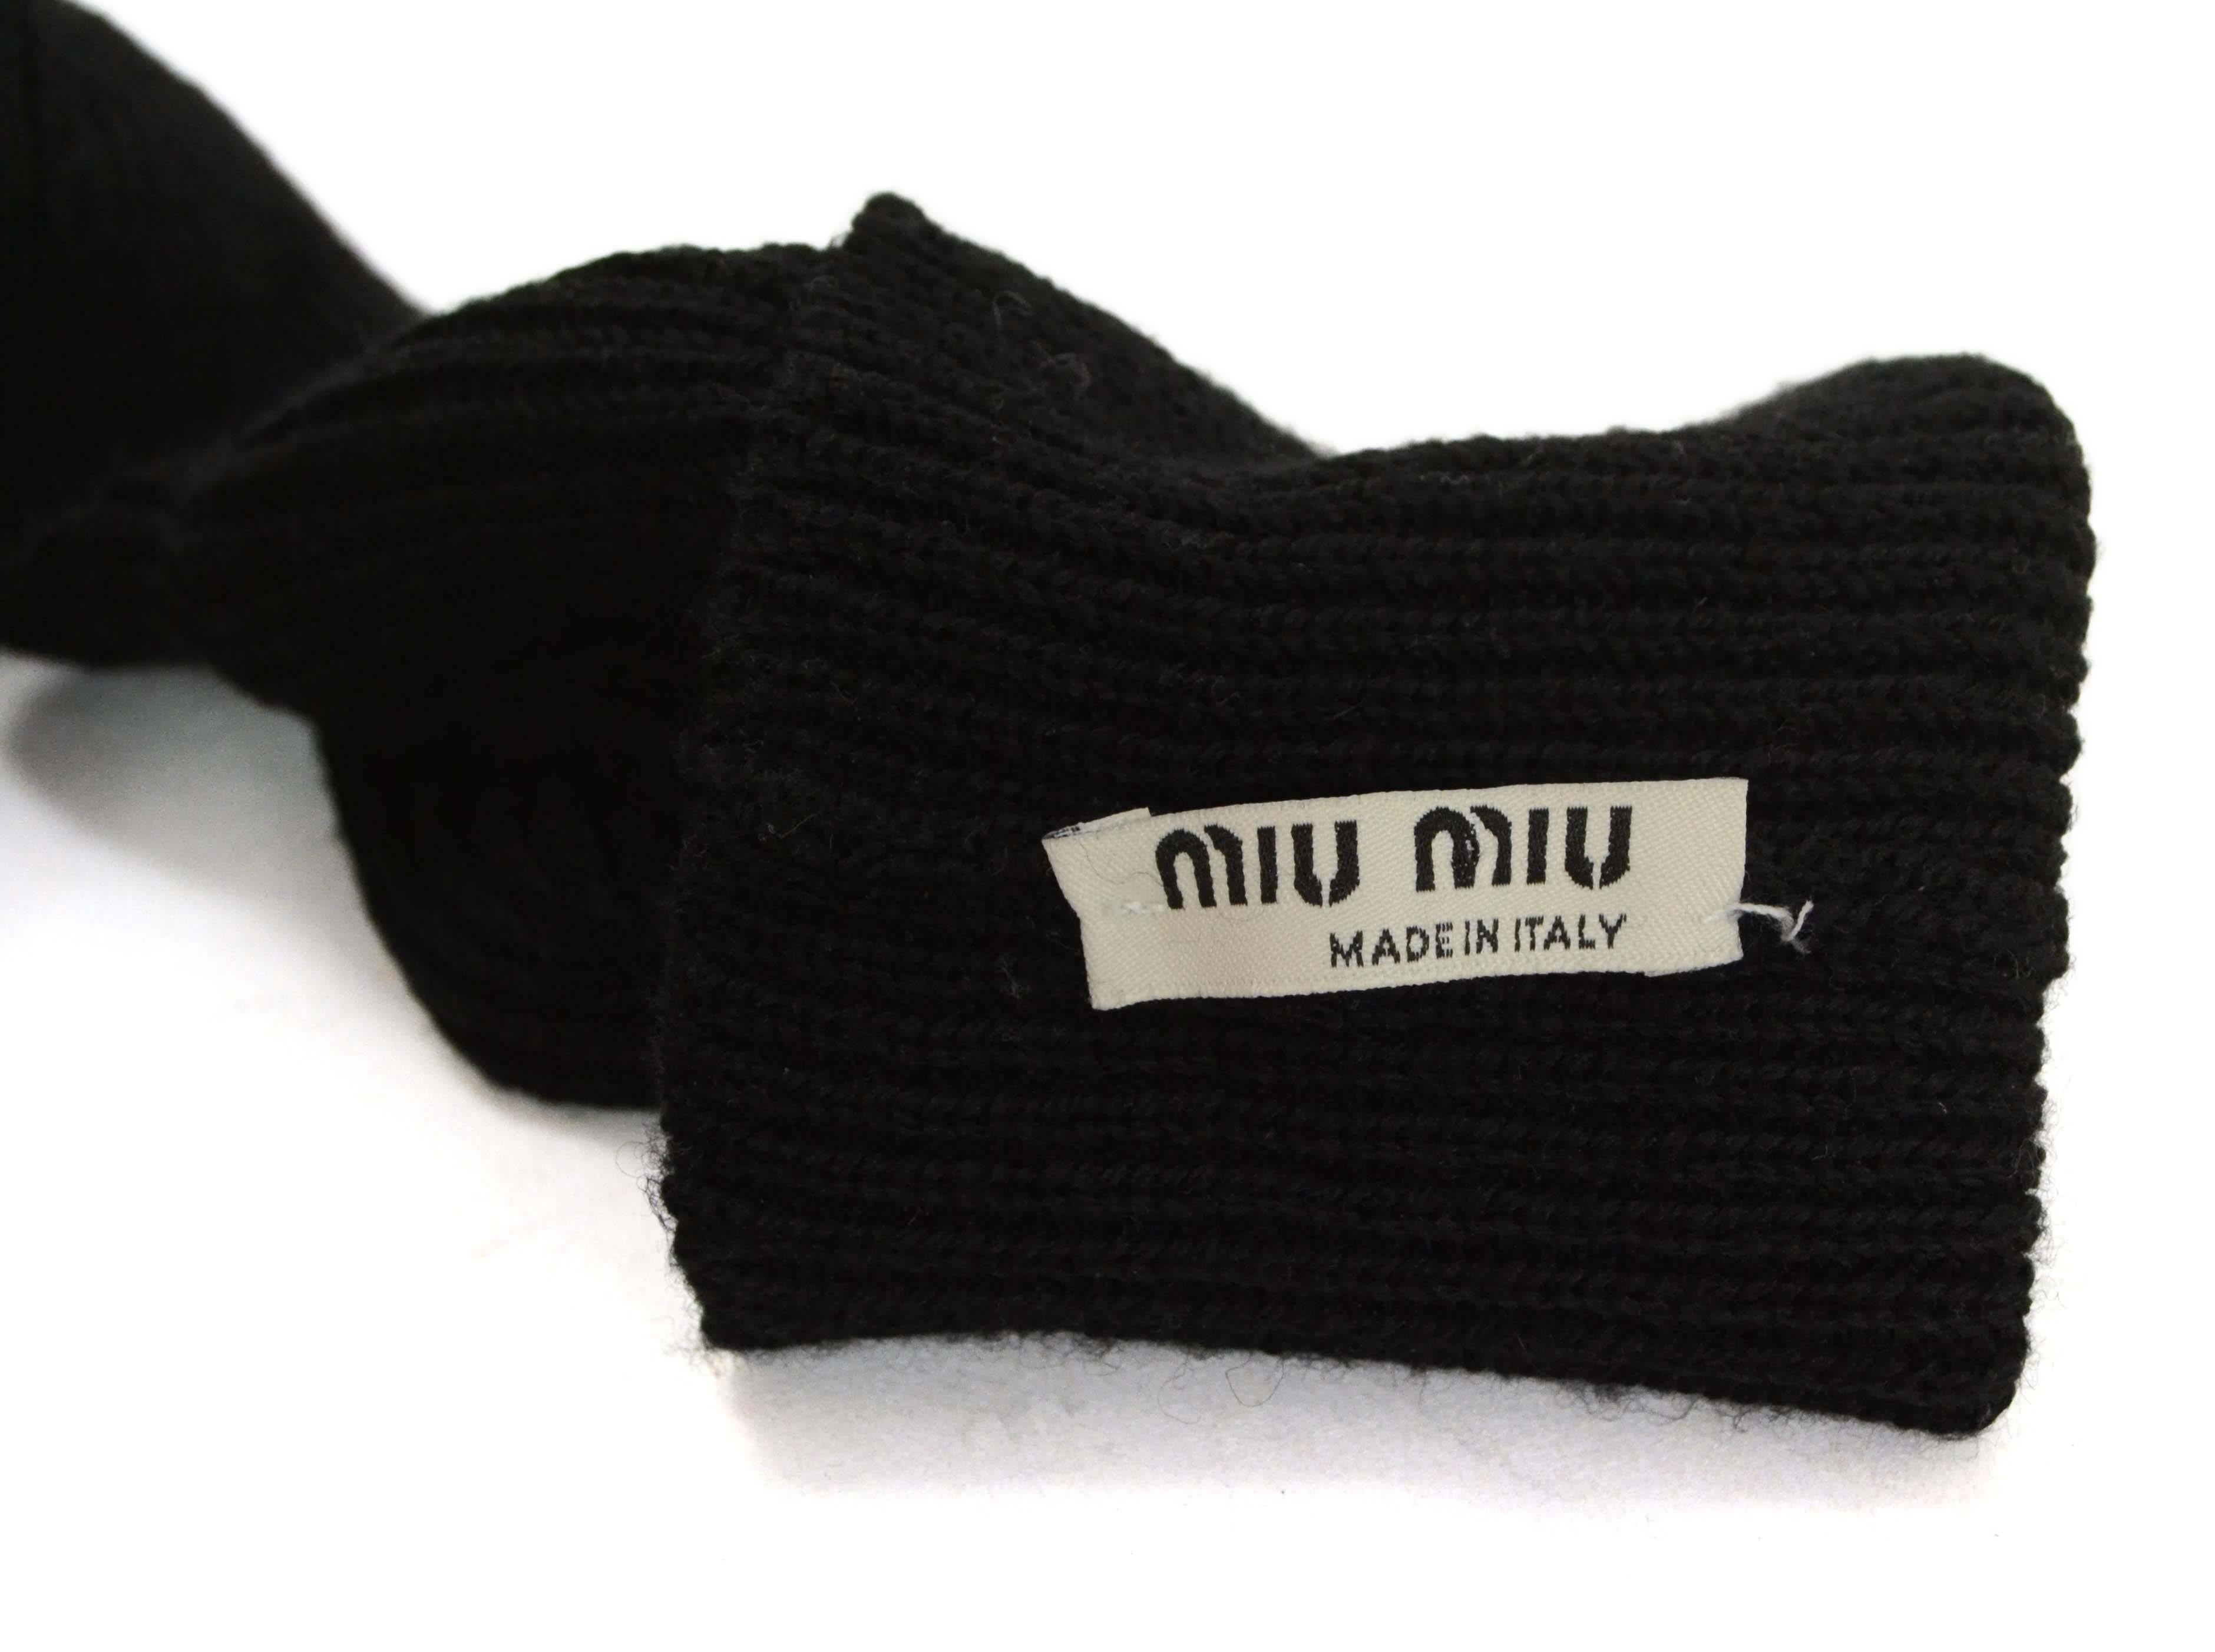 Miu Miu Black Knit Long Gloves
Made In: Italy
Color: Black
Materials: Knit wool
Closure/Opening: Pull on
Stamp: Miu Miu made in Italy
Overall Condition: Excellent pre-owned condition
Marked Size: S
Total Length: 12.75